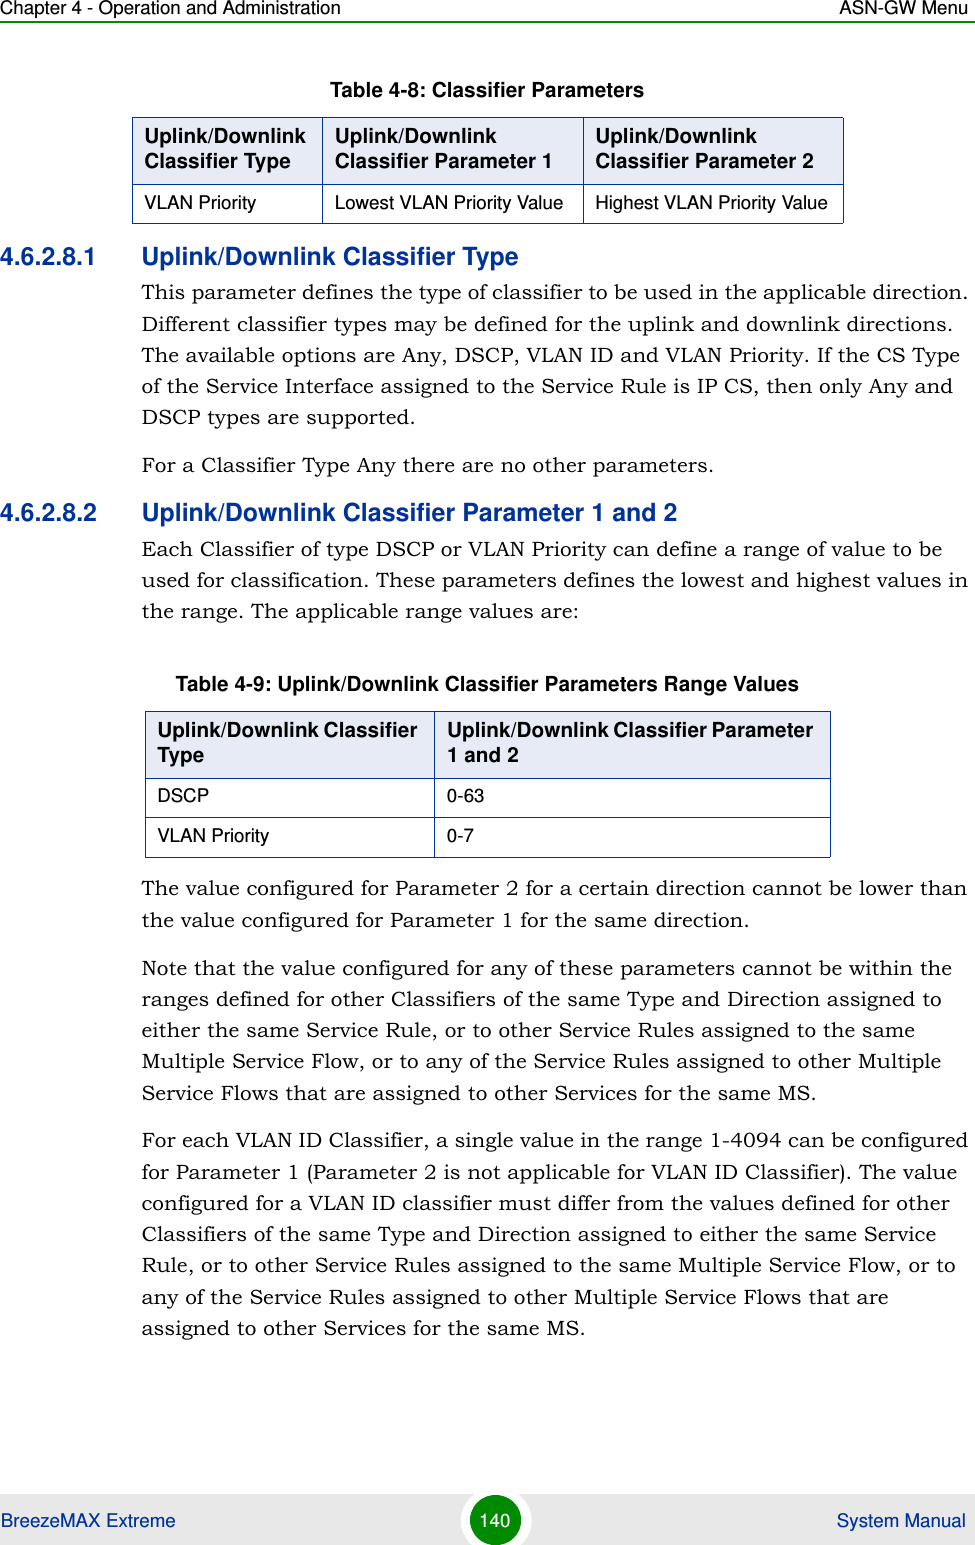 Chapter 4 - Operation and Administration ASN-GW MenuBreezeMAX Extreme 140  System Manual4.6.2.8.1 Uplink/Downlink Classifier TypeThis parameter defines the type of classifier to be used in the applicable direction. Different classifier types may be defined for the uplink and downlink directions. The available options are Any, DSCP, VLAN ID and VLAN Priority. If the CS Type of the Service Interface assigned to the Service Rule is IP CS, then only Any and DSCP types are supported.For a Classifier Type Any there are no other parameters.4.6.2.8.2 Uplink/Downlink Classifier Parameter 1 and 2Each Classifier of type DSCP or VLAN Priority can define a range of value to be used for classification. These parameters defines the lowest and highest values in the range. The applicable range values are:The value configured for Parameter 2 for a certain direction cannot be lower than the value configured for Parameter 1 for the same direction.Note that the value configured for any of these parameters cannot be within the ranges defined for other Classifiers of the same Type and Direction assigned to either the same Service Rule, or to other Service Rules assigned to the same Multiple Service Flow, or to any of the Service Rules assigned to other Multiple Service Flows that are assigned to other Services for the same MS. For each VLAN ID Classifier, a single value in the range 1-4094 can be configured for Parameter 1 (Parameter 2 is not applicable for VLAN ID Classifier). The value configured for a VLAN ID classifier must differ from the values defined for other Classifiers of the same Type and Direction assigned to either the same Service Rule, or to other Service Rules assigned to the same Multiple Service Flow, or to any of the Service Rules assigned to other Multiple Service Flows that are assigned to other Services for the same MS.VLAN Priority Lowest VLAN Priority Value Highest VLAN Priority ValueTable 4-9: Uplink/Downlink Classifier Parameters Range ValuesUplink/Downlink Classifier Type Uplink/Downlink Classifier Parameter 1 and 2DSCP 0-63VLAN Priority 0-7Table 4-8: Classifier ParametersUplink/Downlink Classifier Type Uplink/Downlink Classifier Parameter 1 Uplink/Downlink Classifier Parameter 2